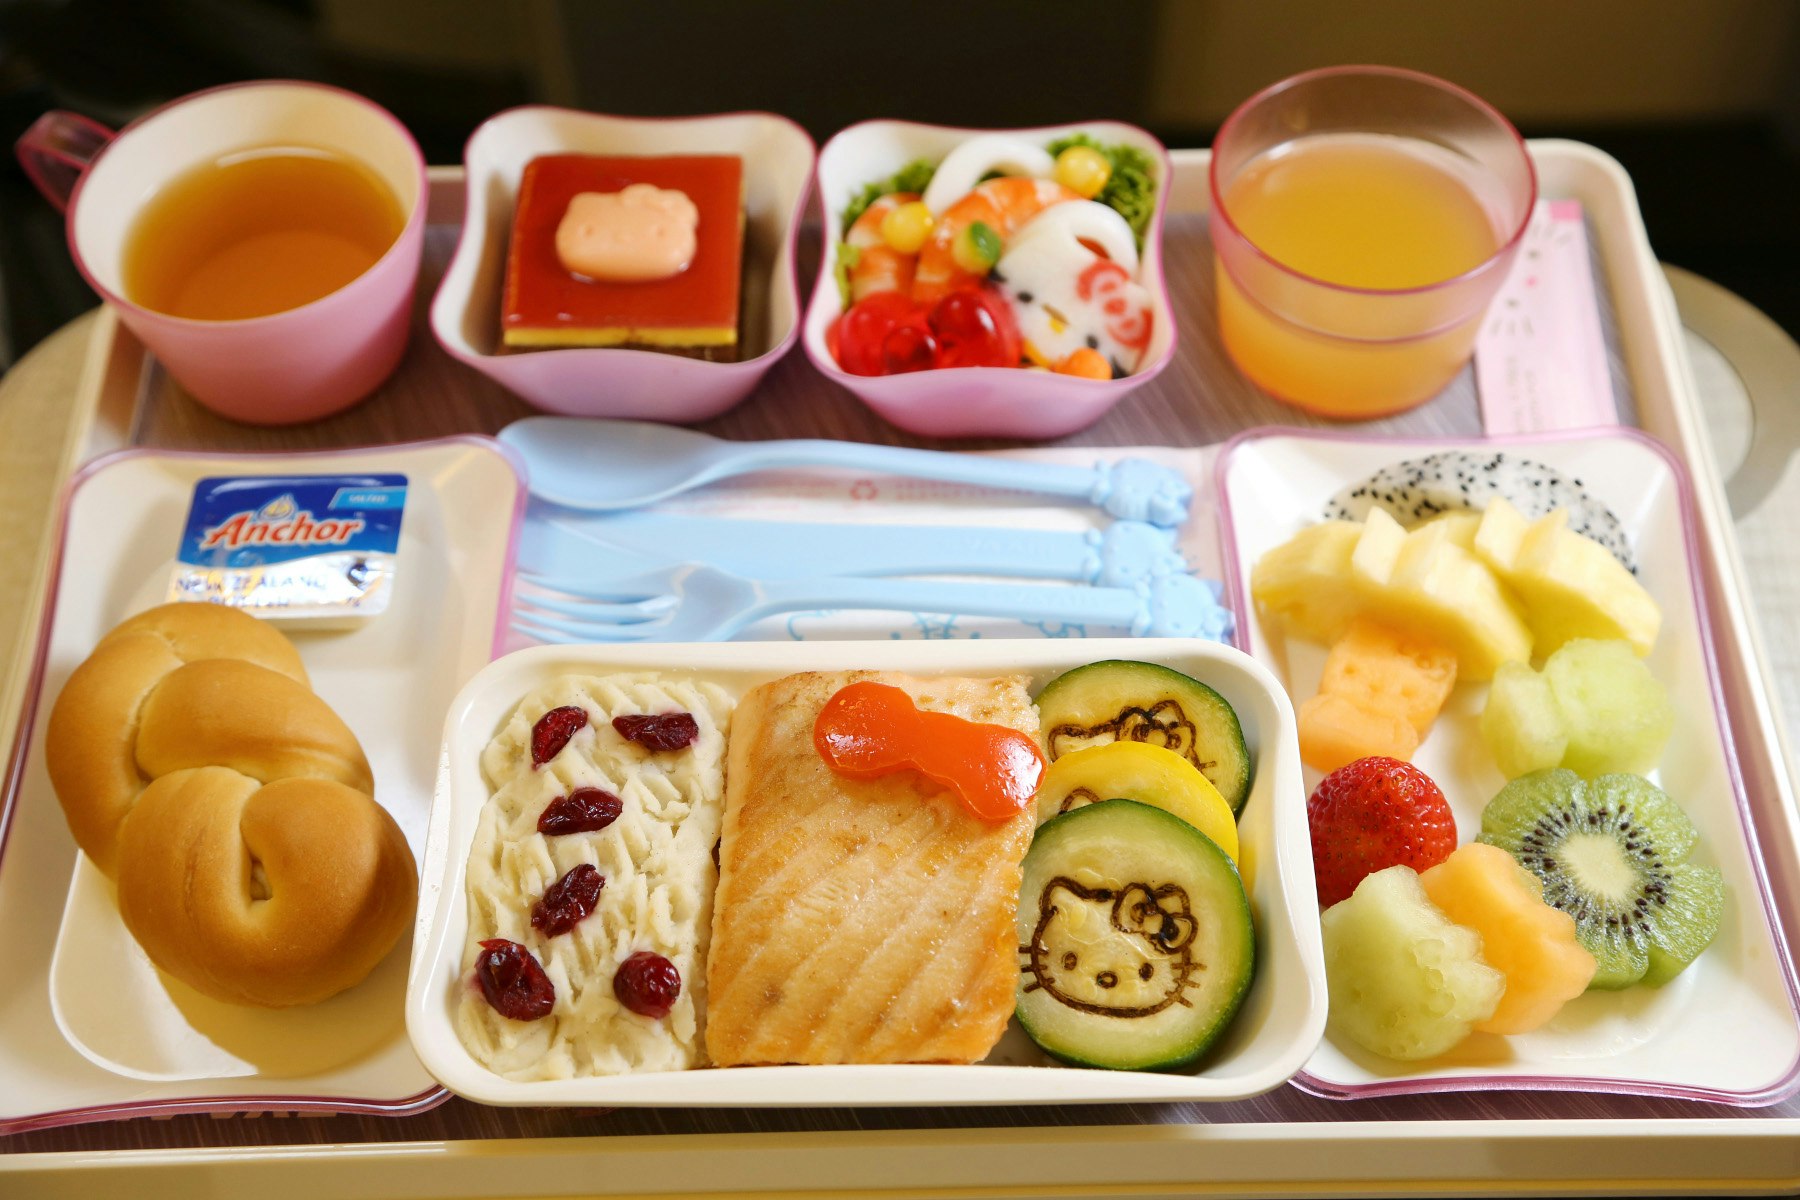 The Hello Kitty detail goes down to the airline meals. Image by Eva Airlines